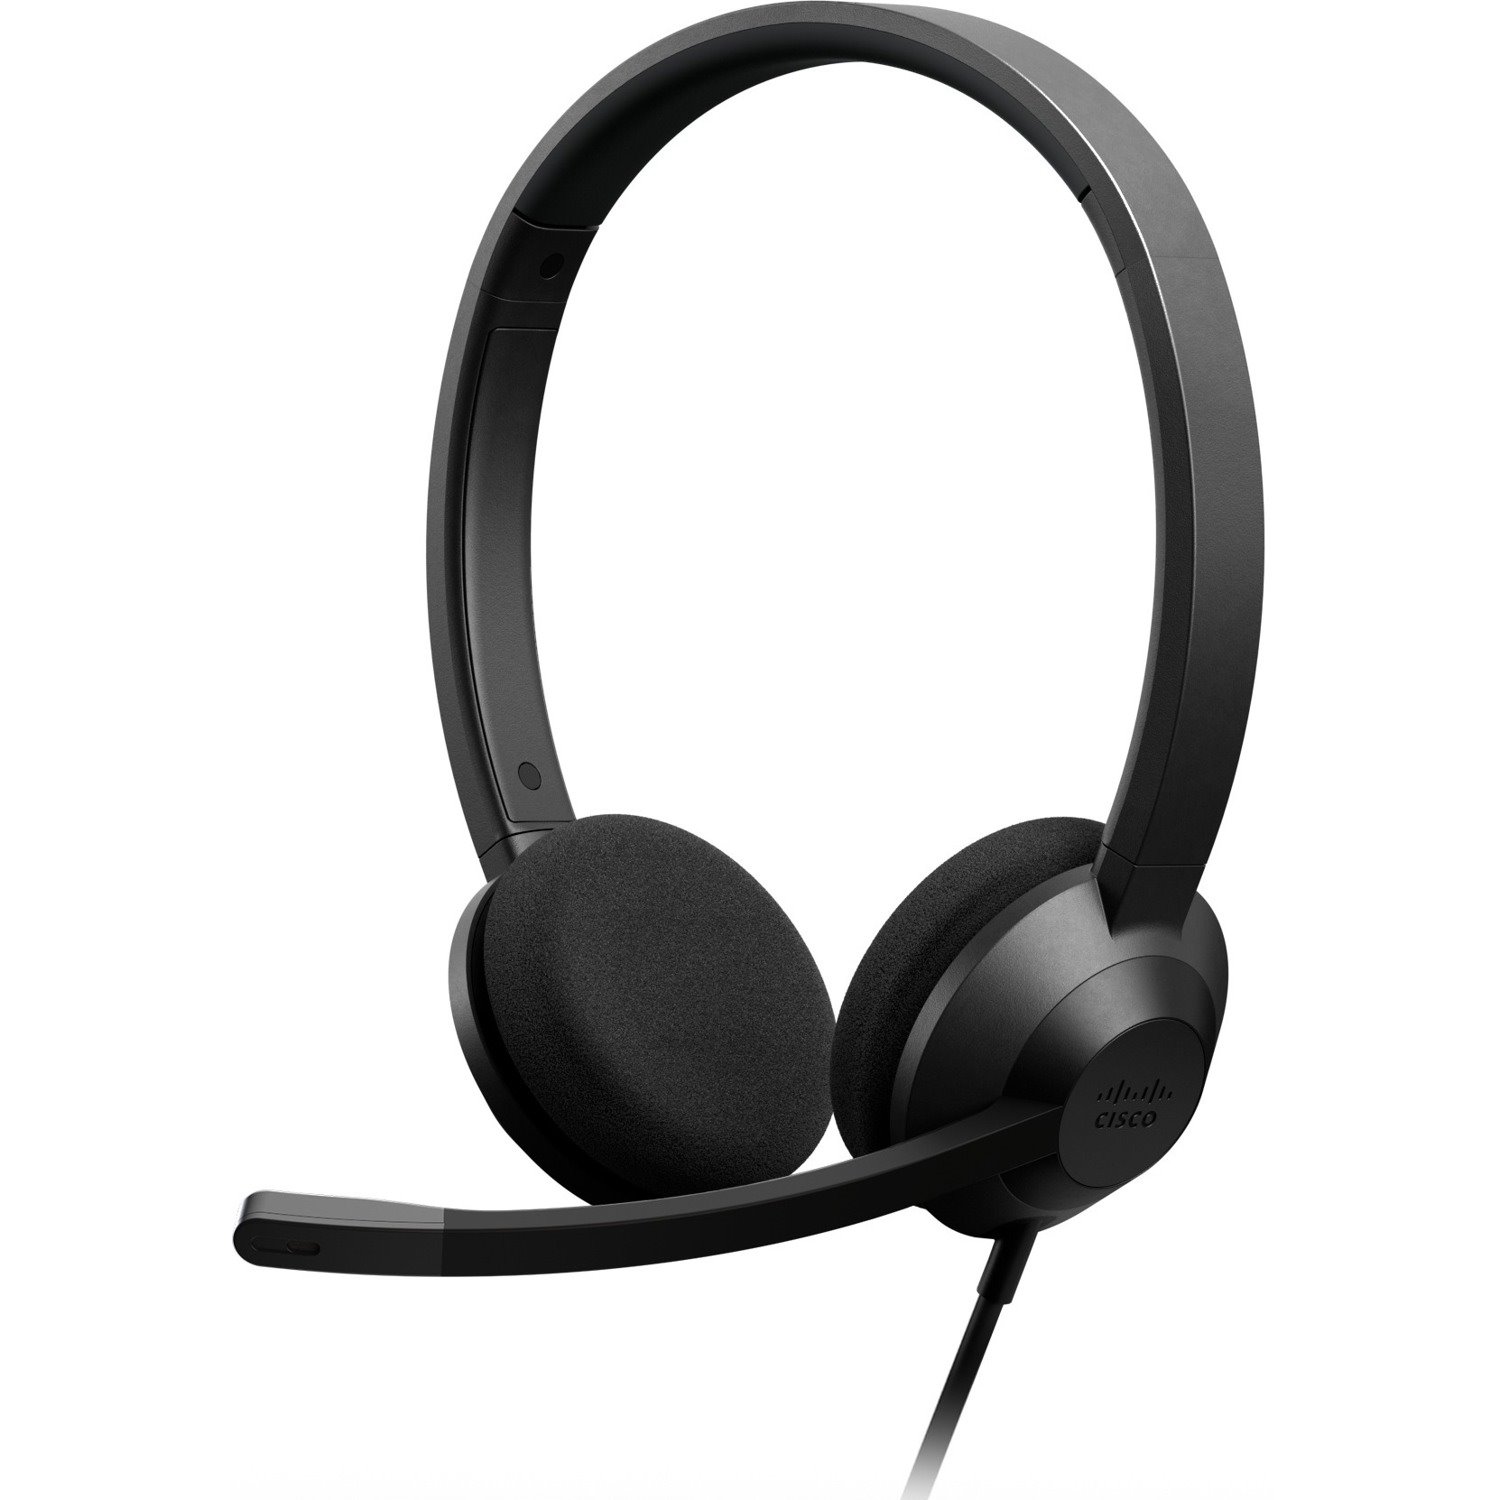 Cisco Headset 322 Wired Dual On-Ear Carbon Black RJ9